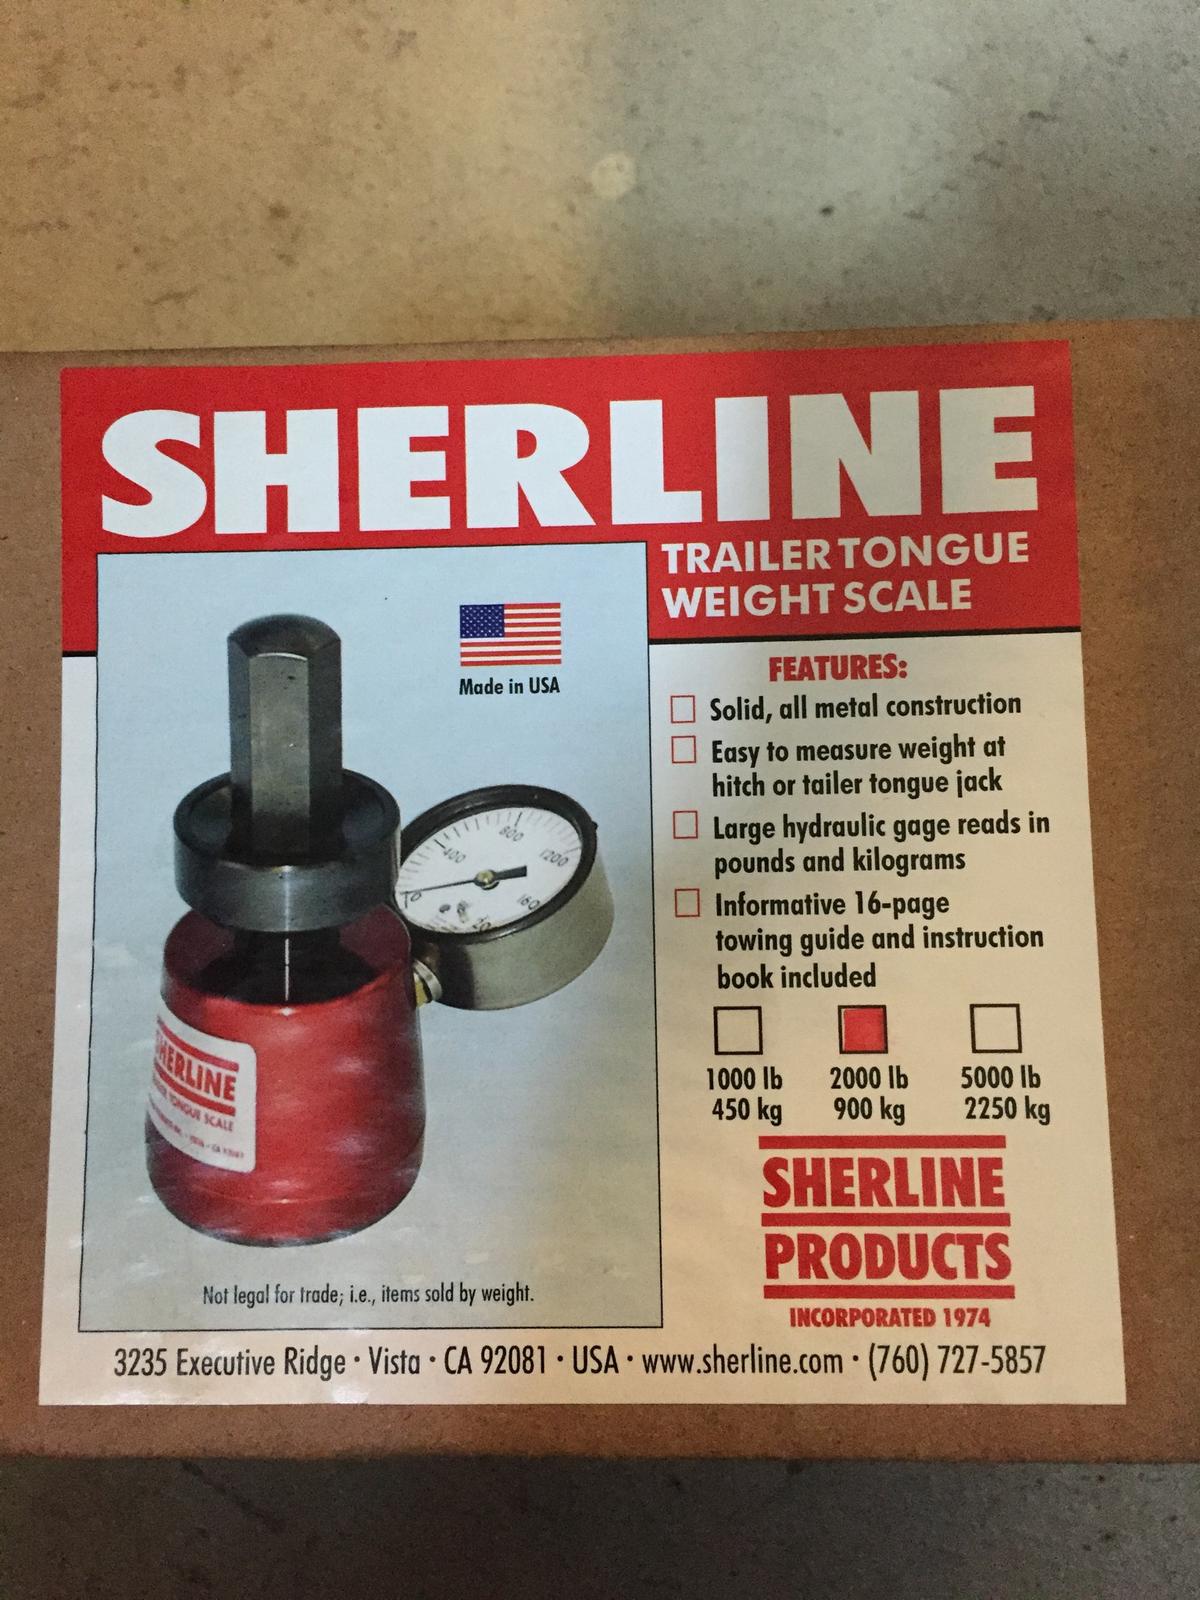 Sherline LM 2000 - Trailer Tongue Weight Scale 2000lb